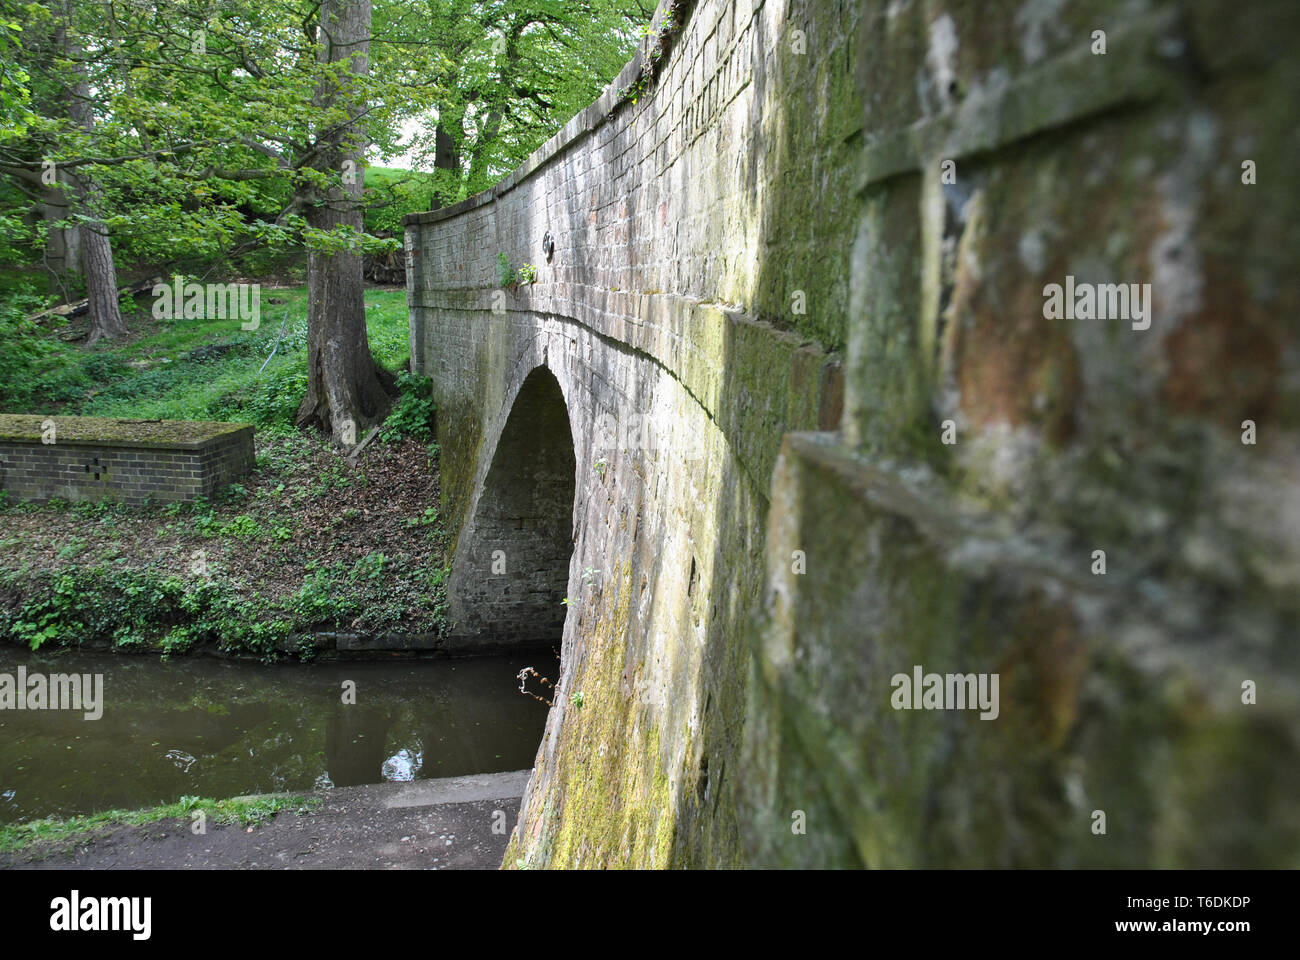 An alternative view of a bridge over an English canal Stock Photo